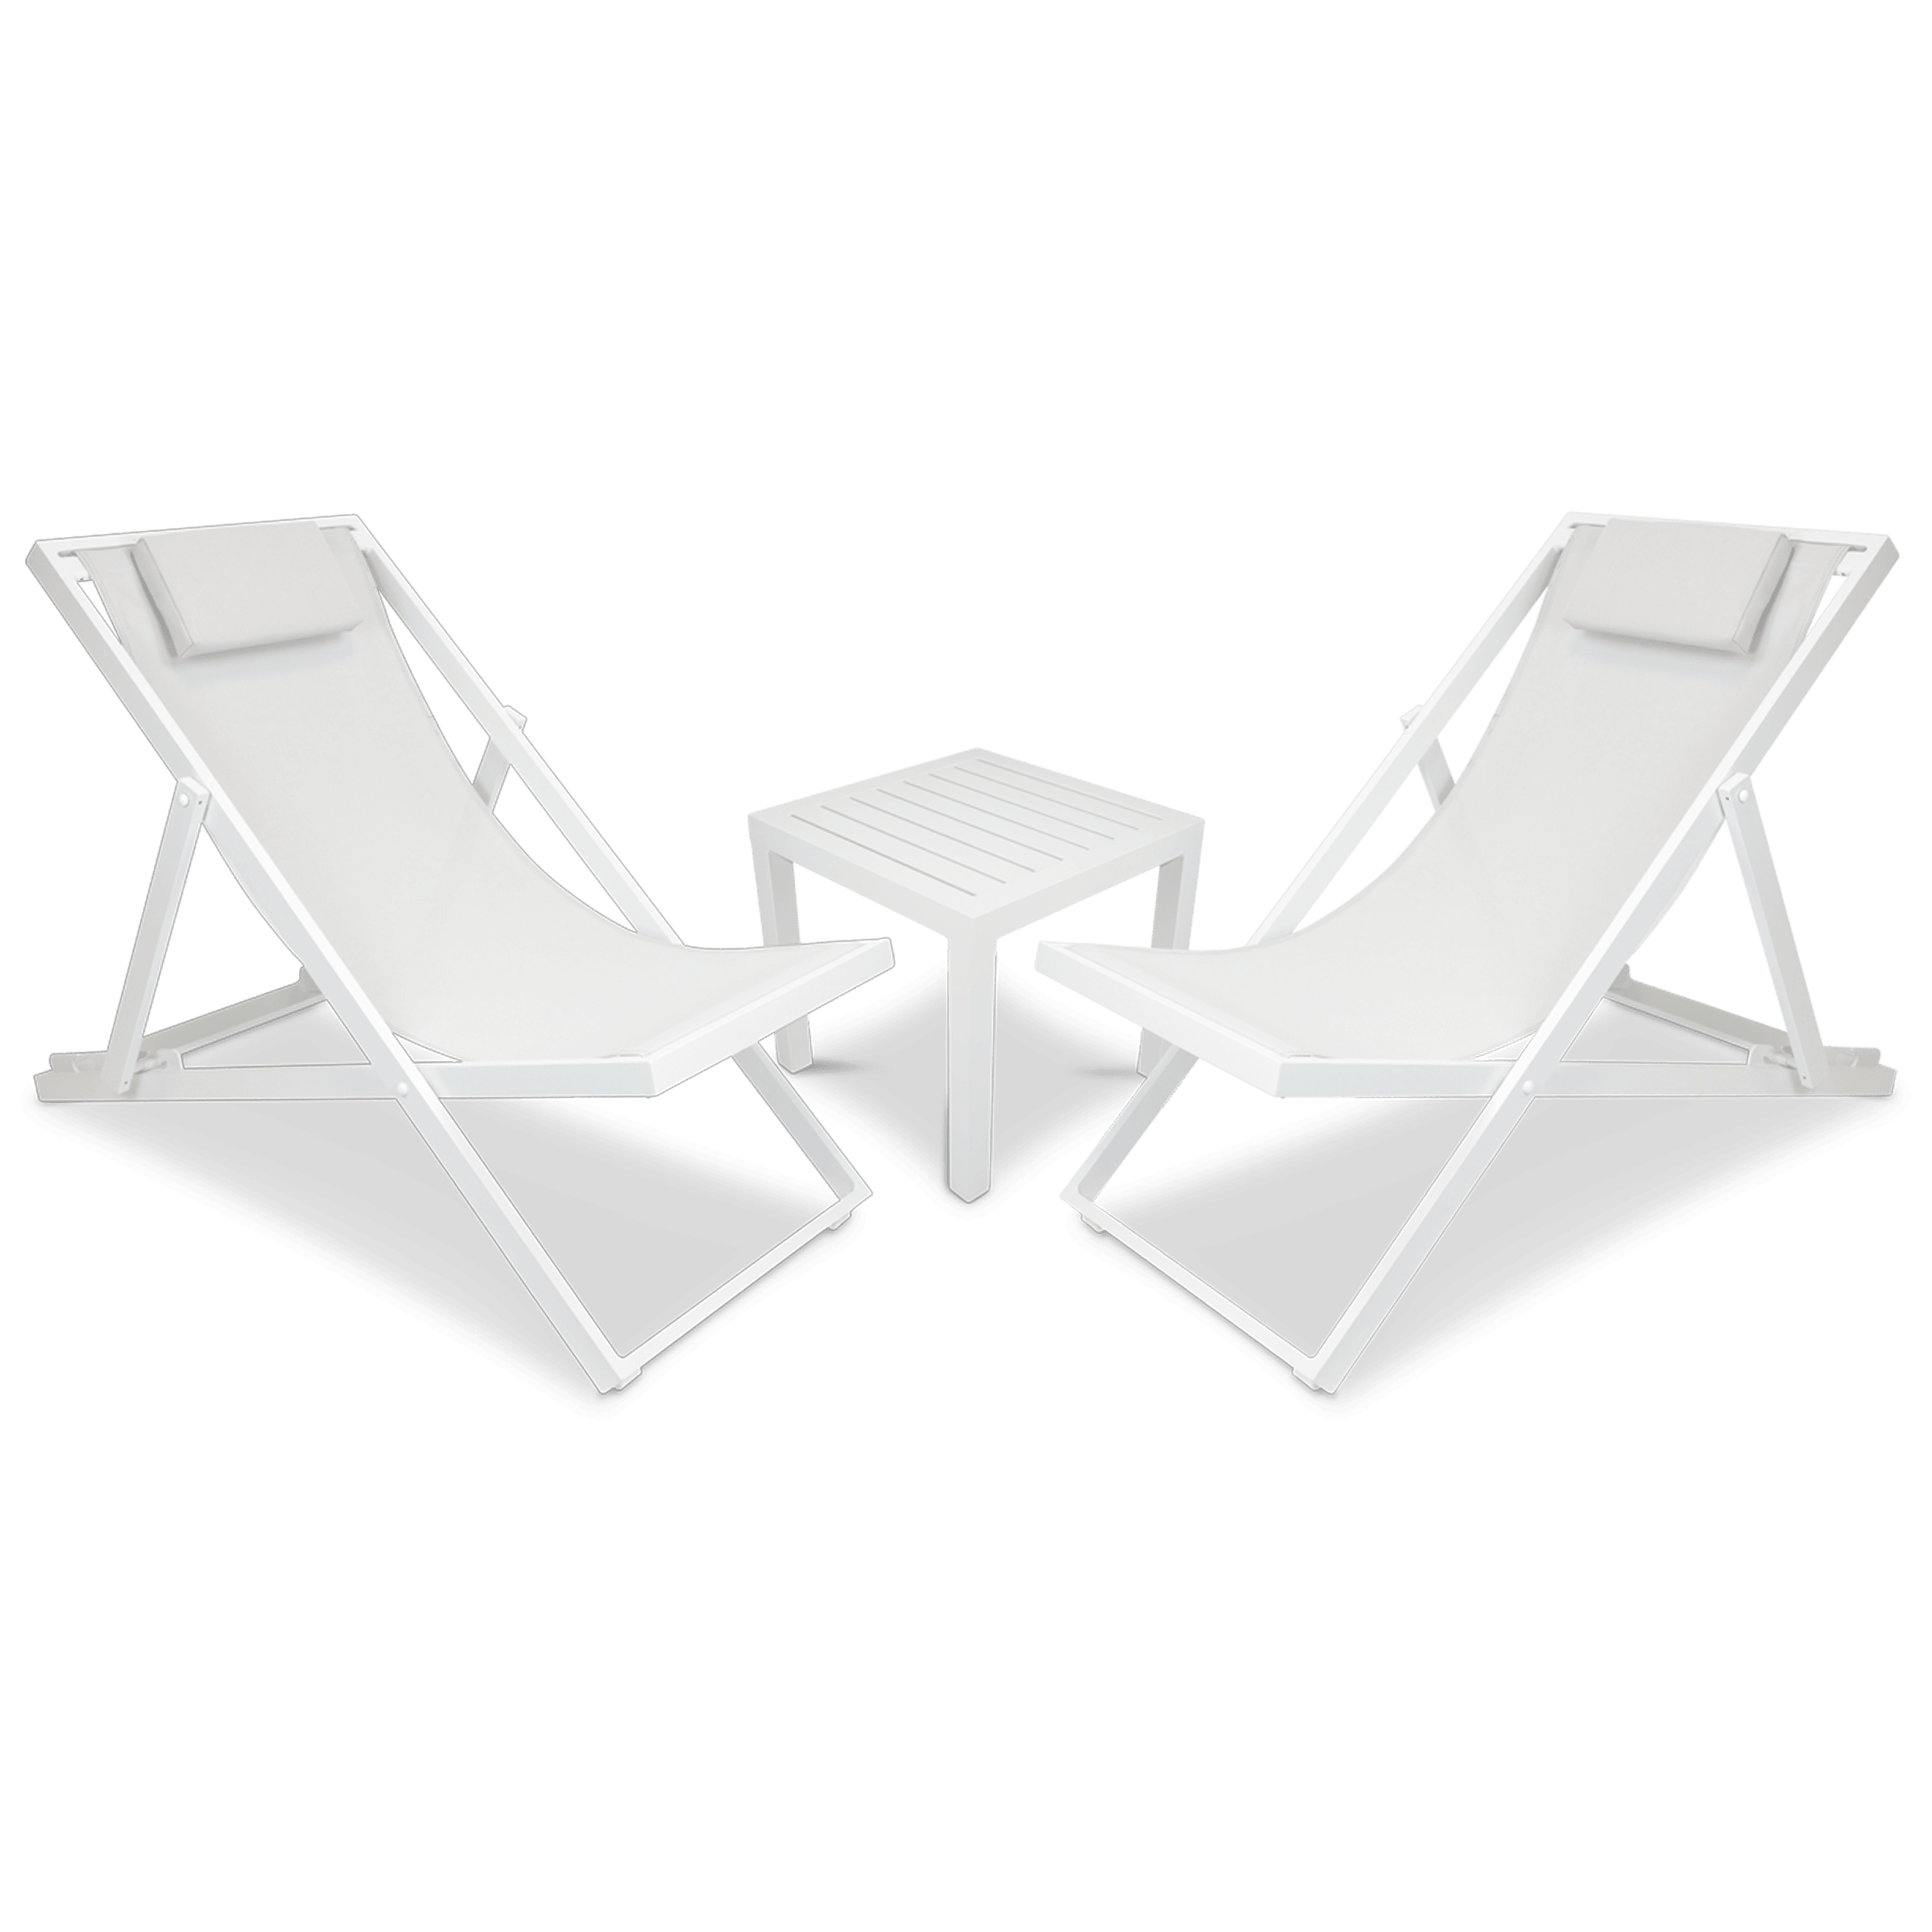 Chill Deck Chair and San Sebastian 3pc Occasional Set in Arctic White and Stone Grey Textilene